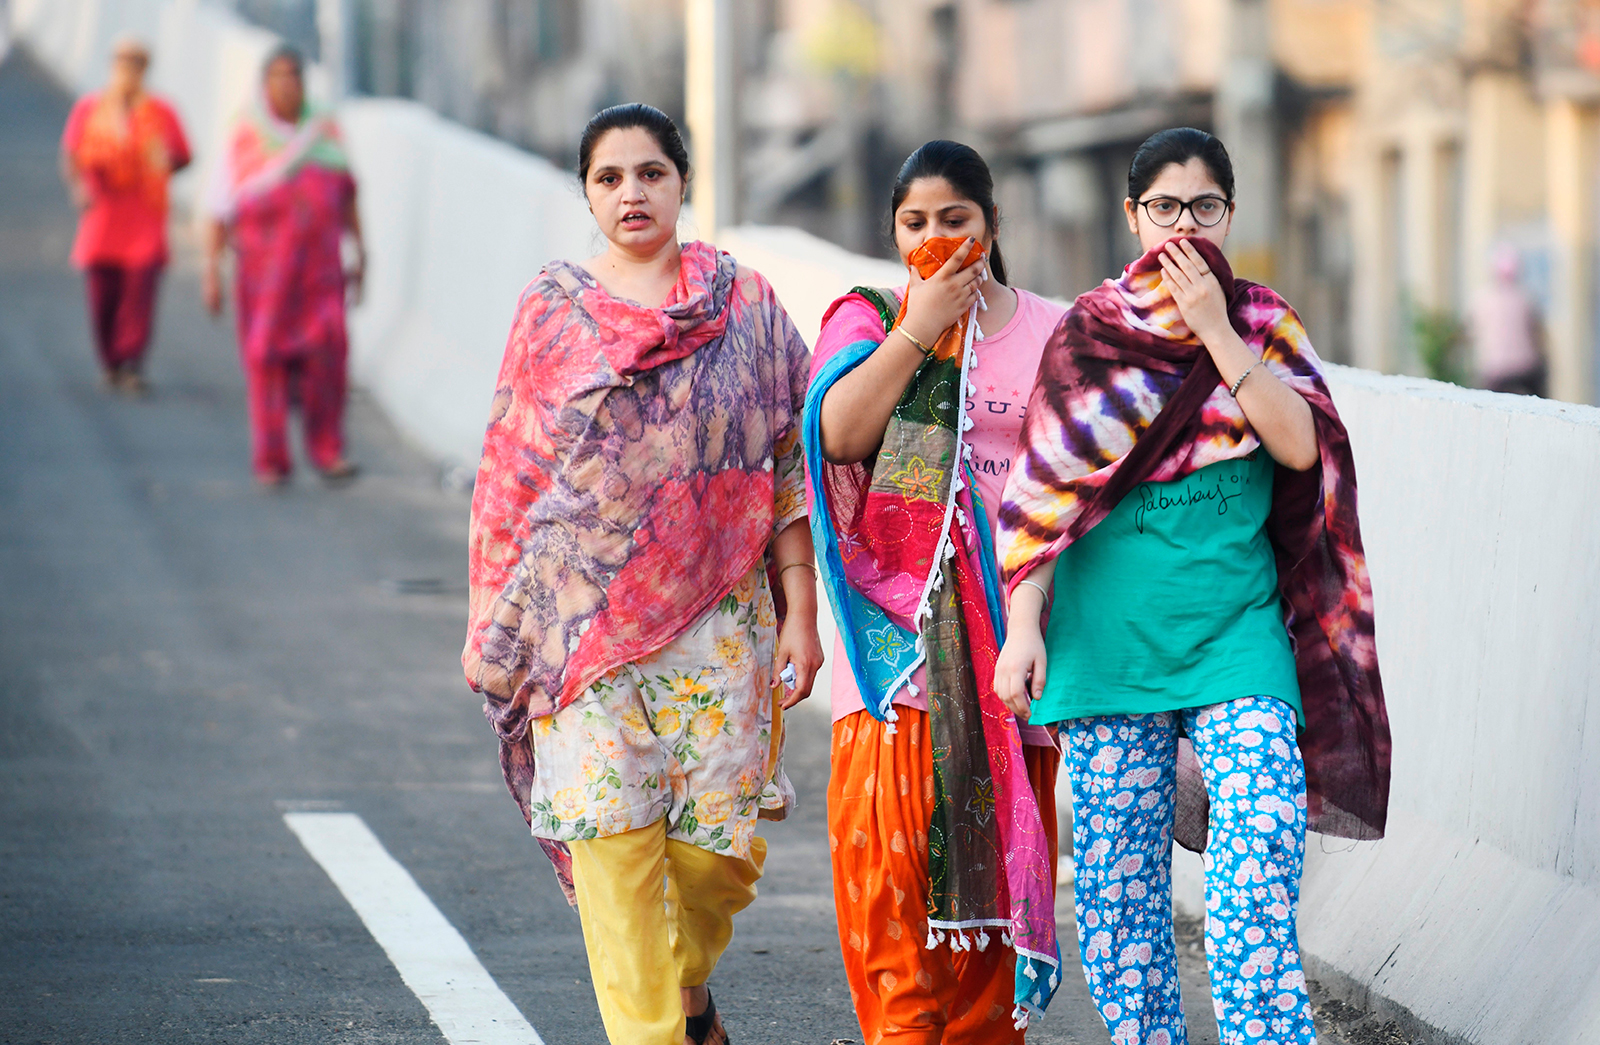 Women walk early in the morning along a road on the outskirts of Amritsar, India on June 16.